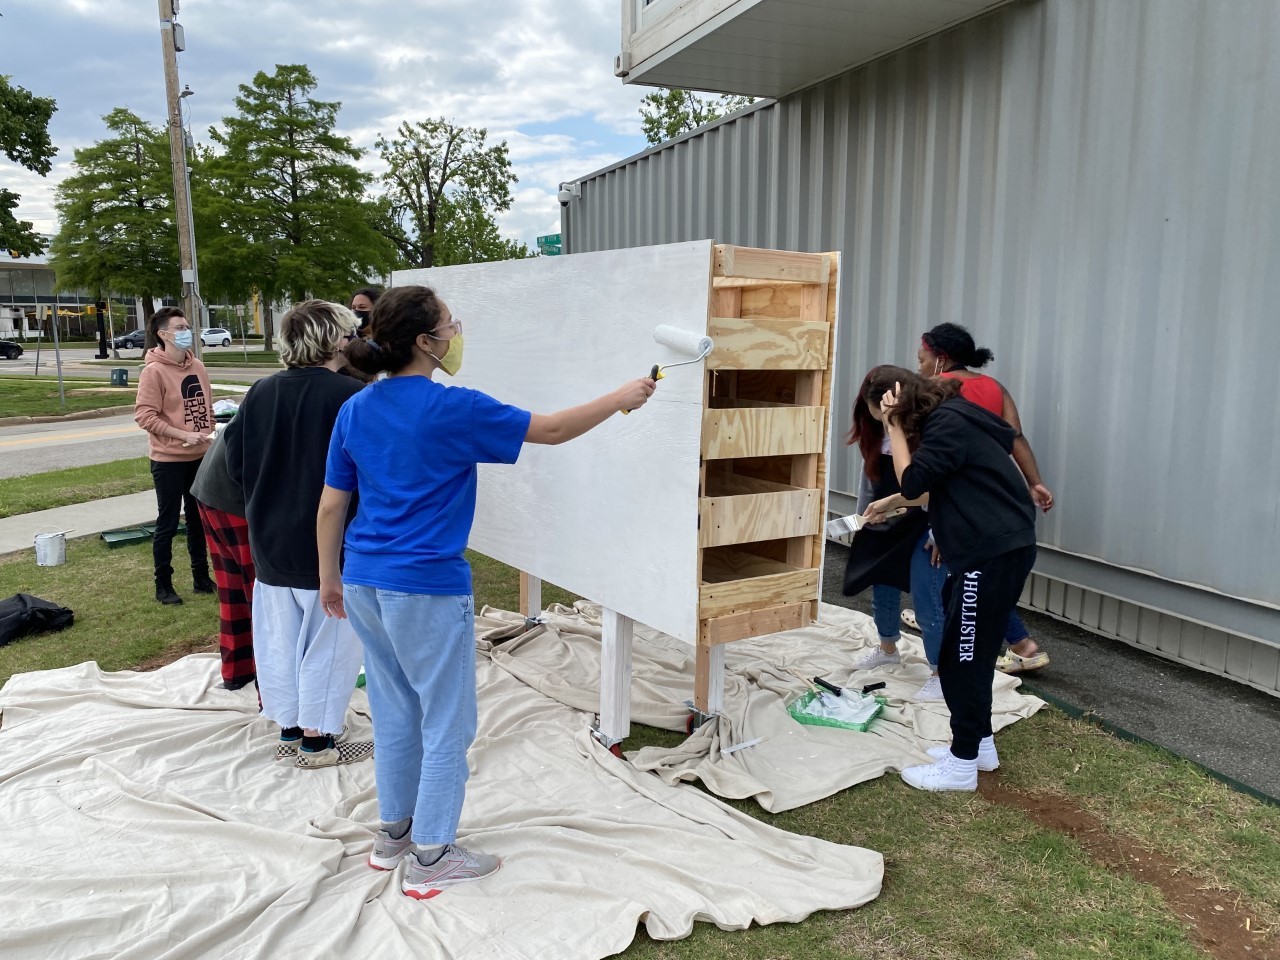 A group of teens in masks are outside. A white sheet is on the green grass underneath them as they paint a large, moveable wooden mural with white paint.